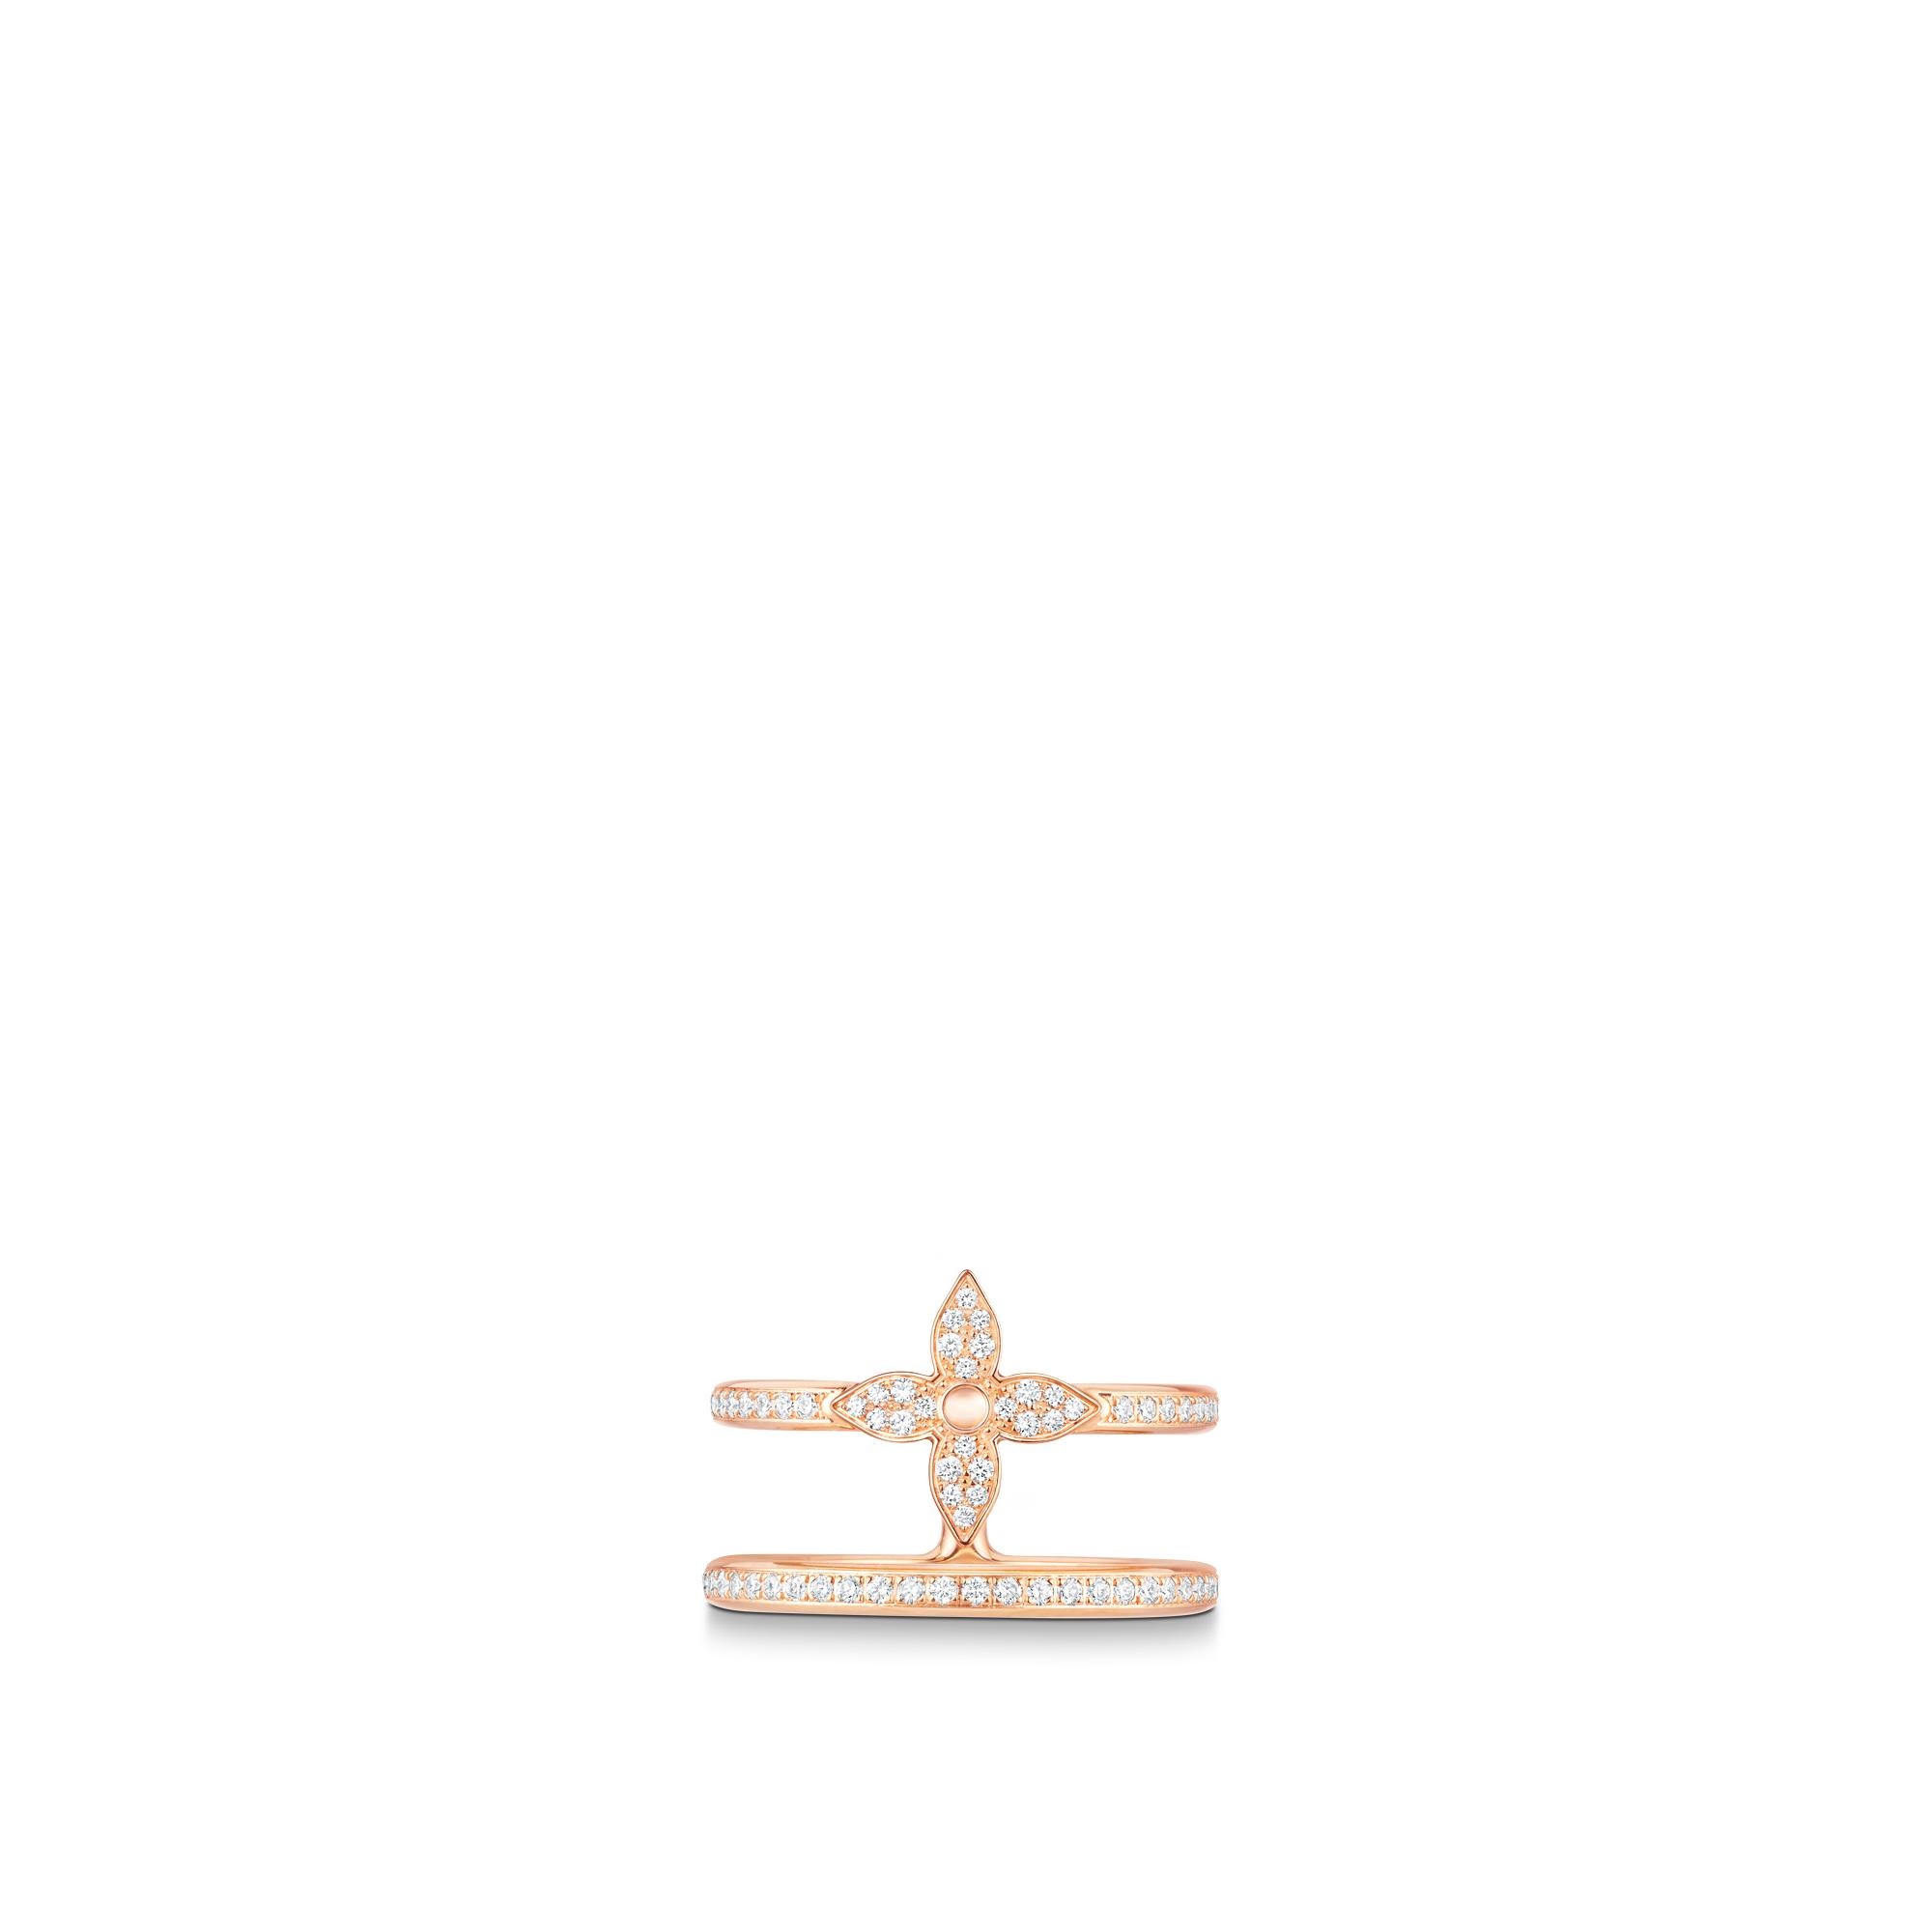 Louis Vuitton Idylle Blossom Paved Ring, 3 Golds and Diamonds Gold. Size 50